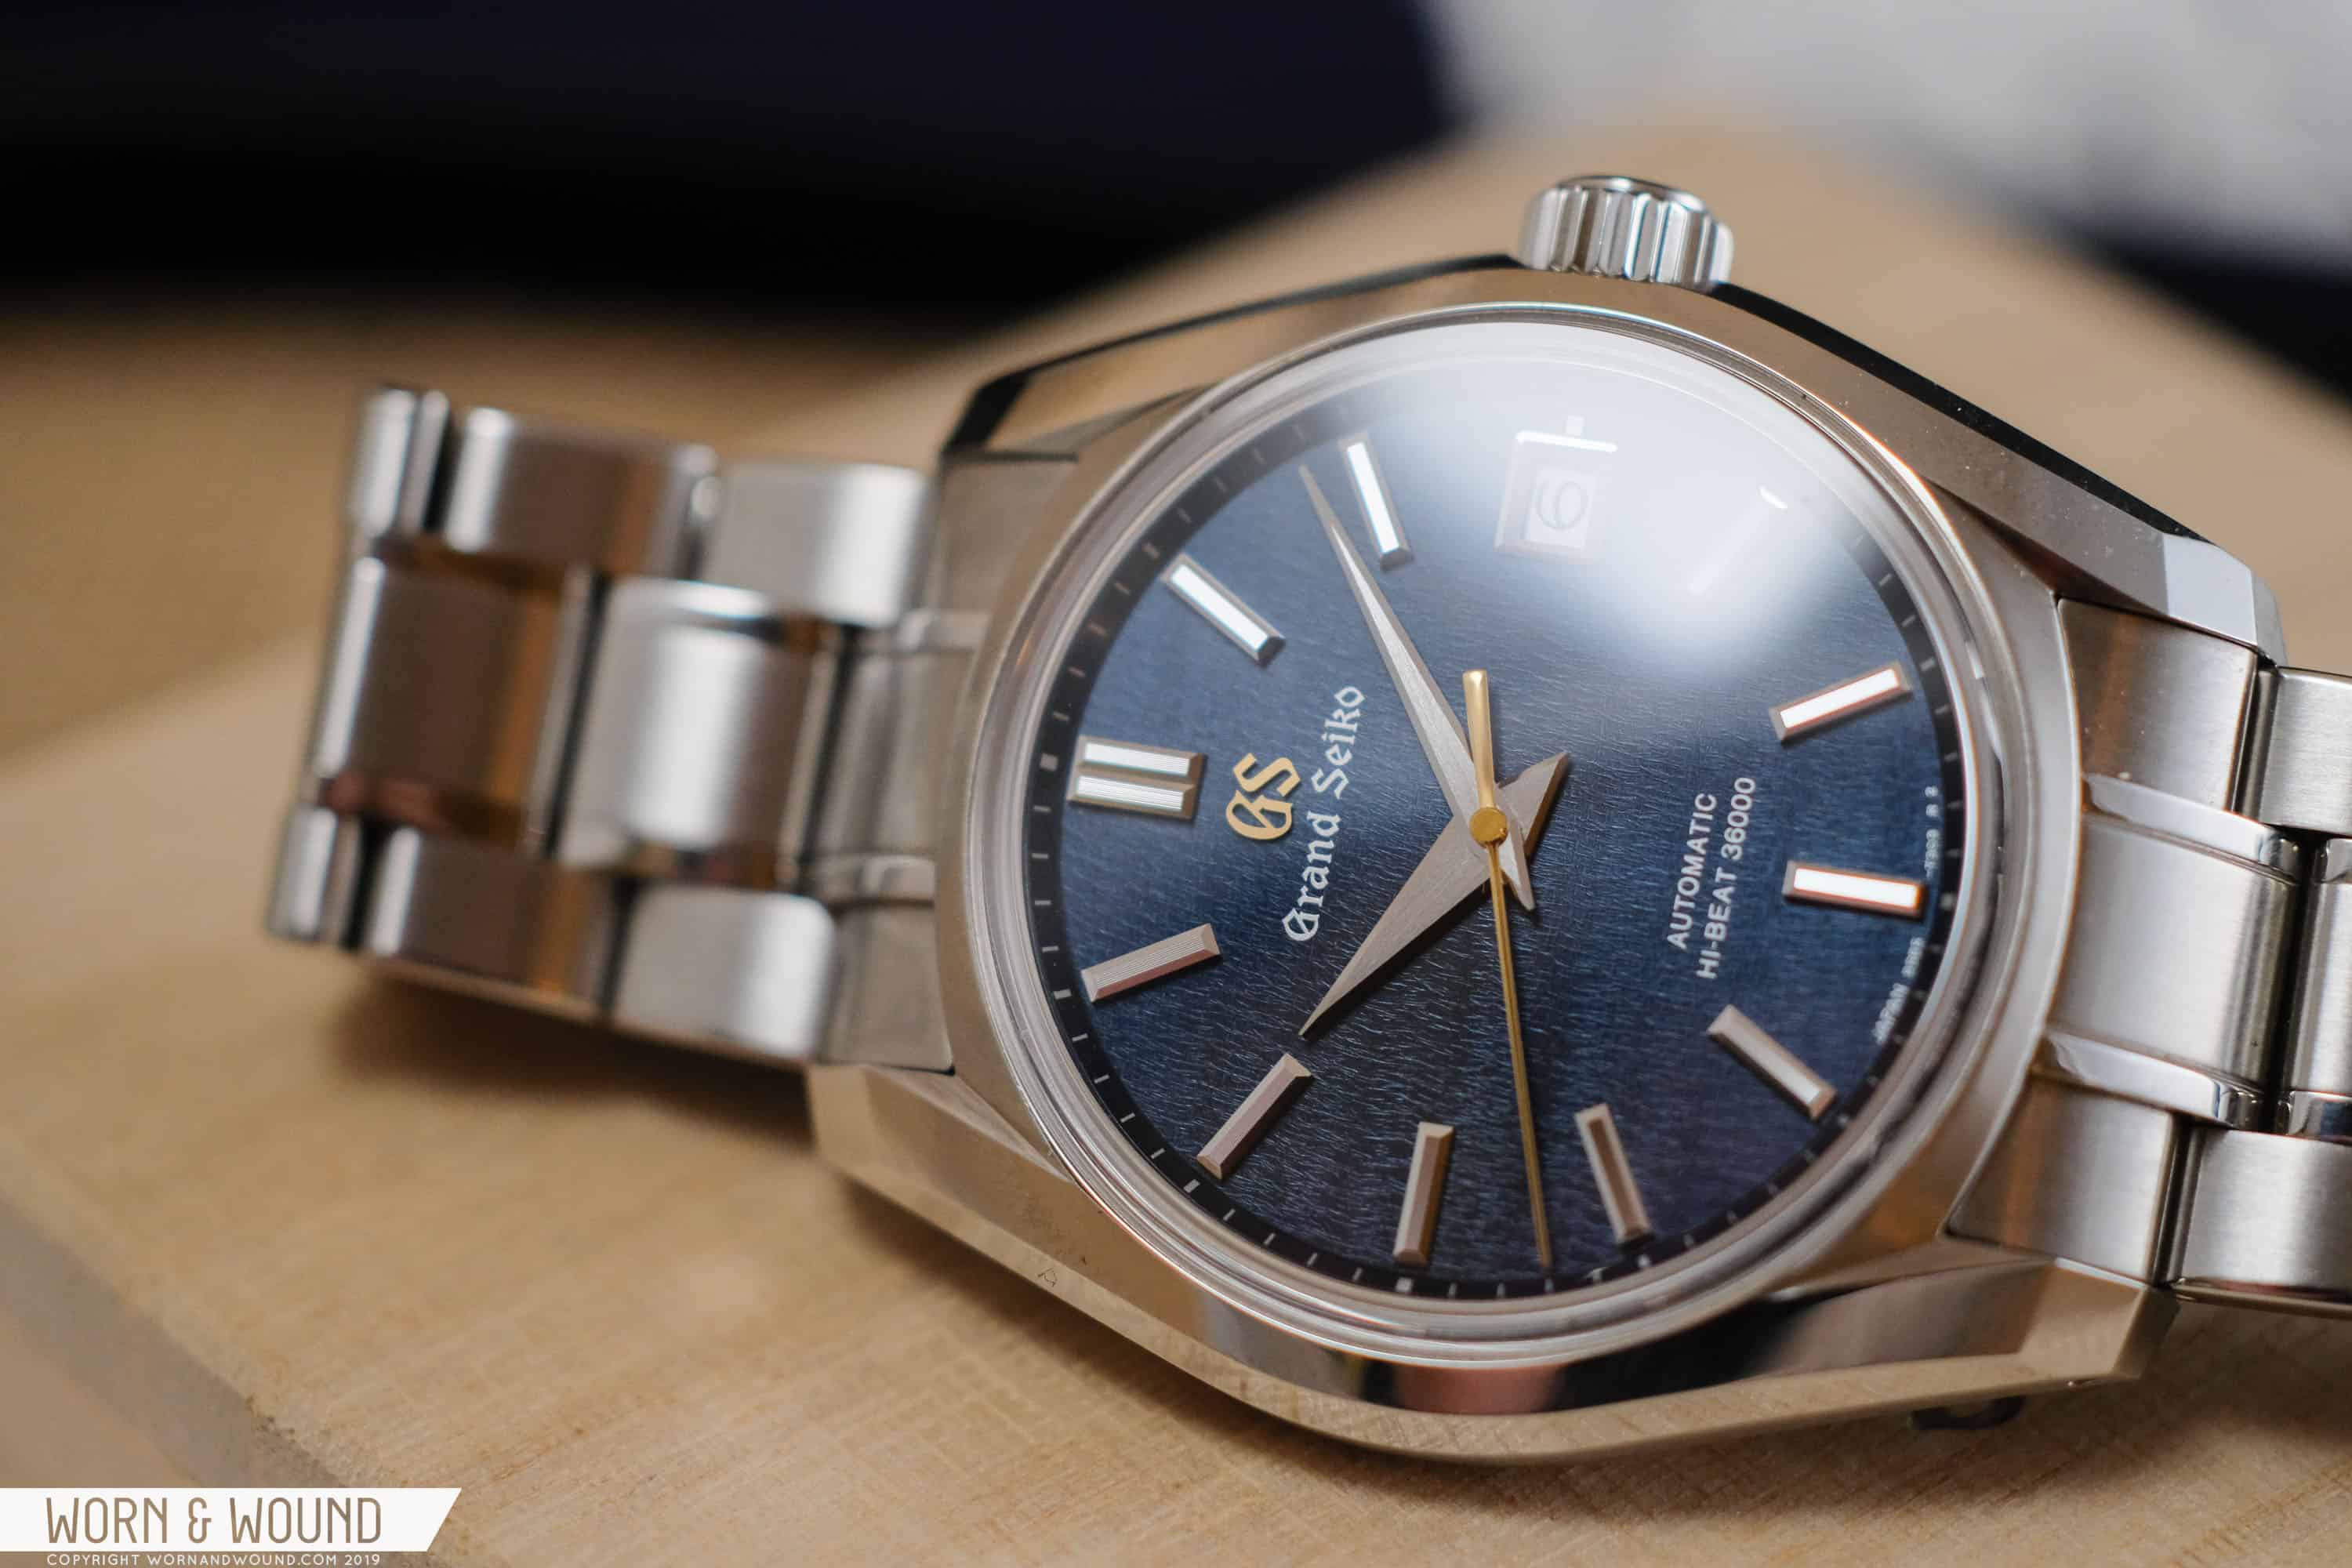 First Look at the USA-Exclusive Grand Seiko Seasons Collection (Refs.  SBGH271, SBGH273, SBGA413, and SBGA415) - Worn & Wound